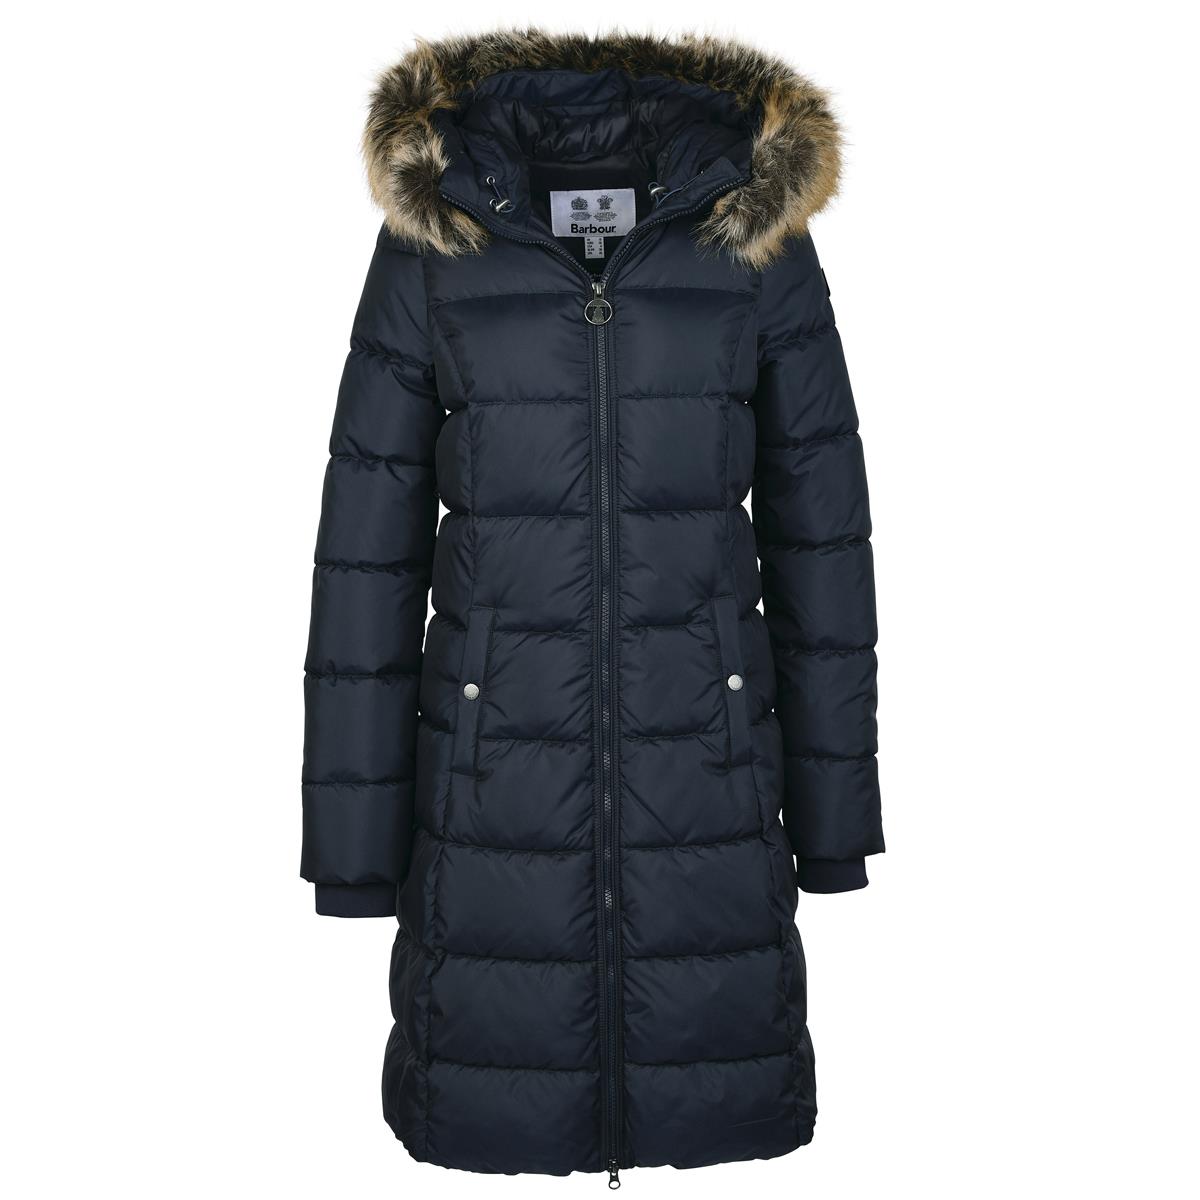 Barbour Womens Rosoman Quilted Jacket Questions & Answers